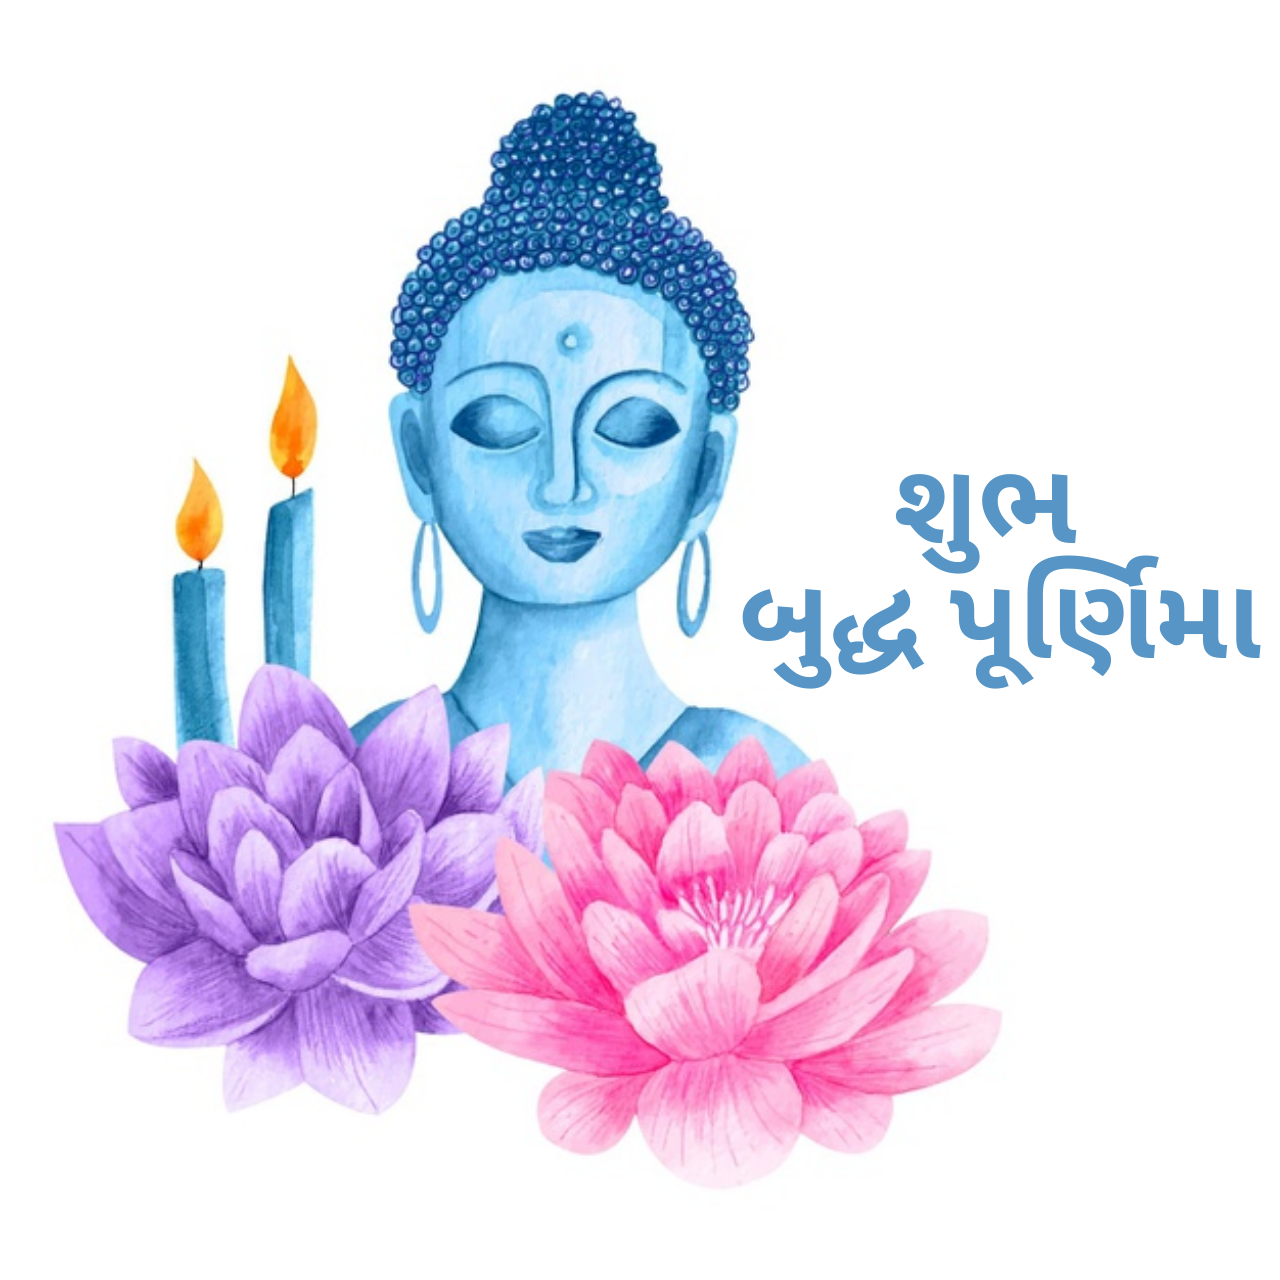 Buddha Purnima 2021: Gujarati and Wishes, HD Images, Greetings, Quotes, Status, and WhatsApp Messages to Share